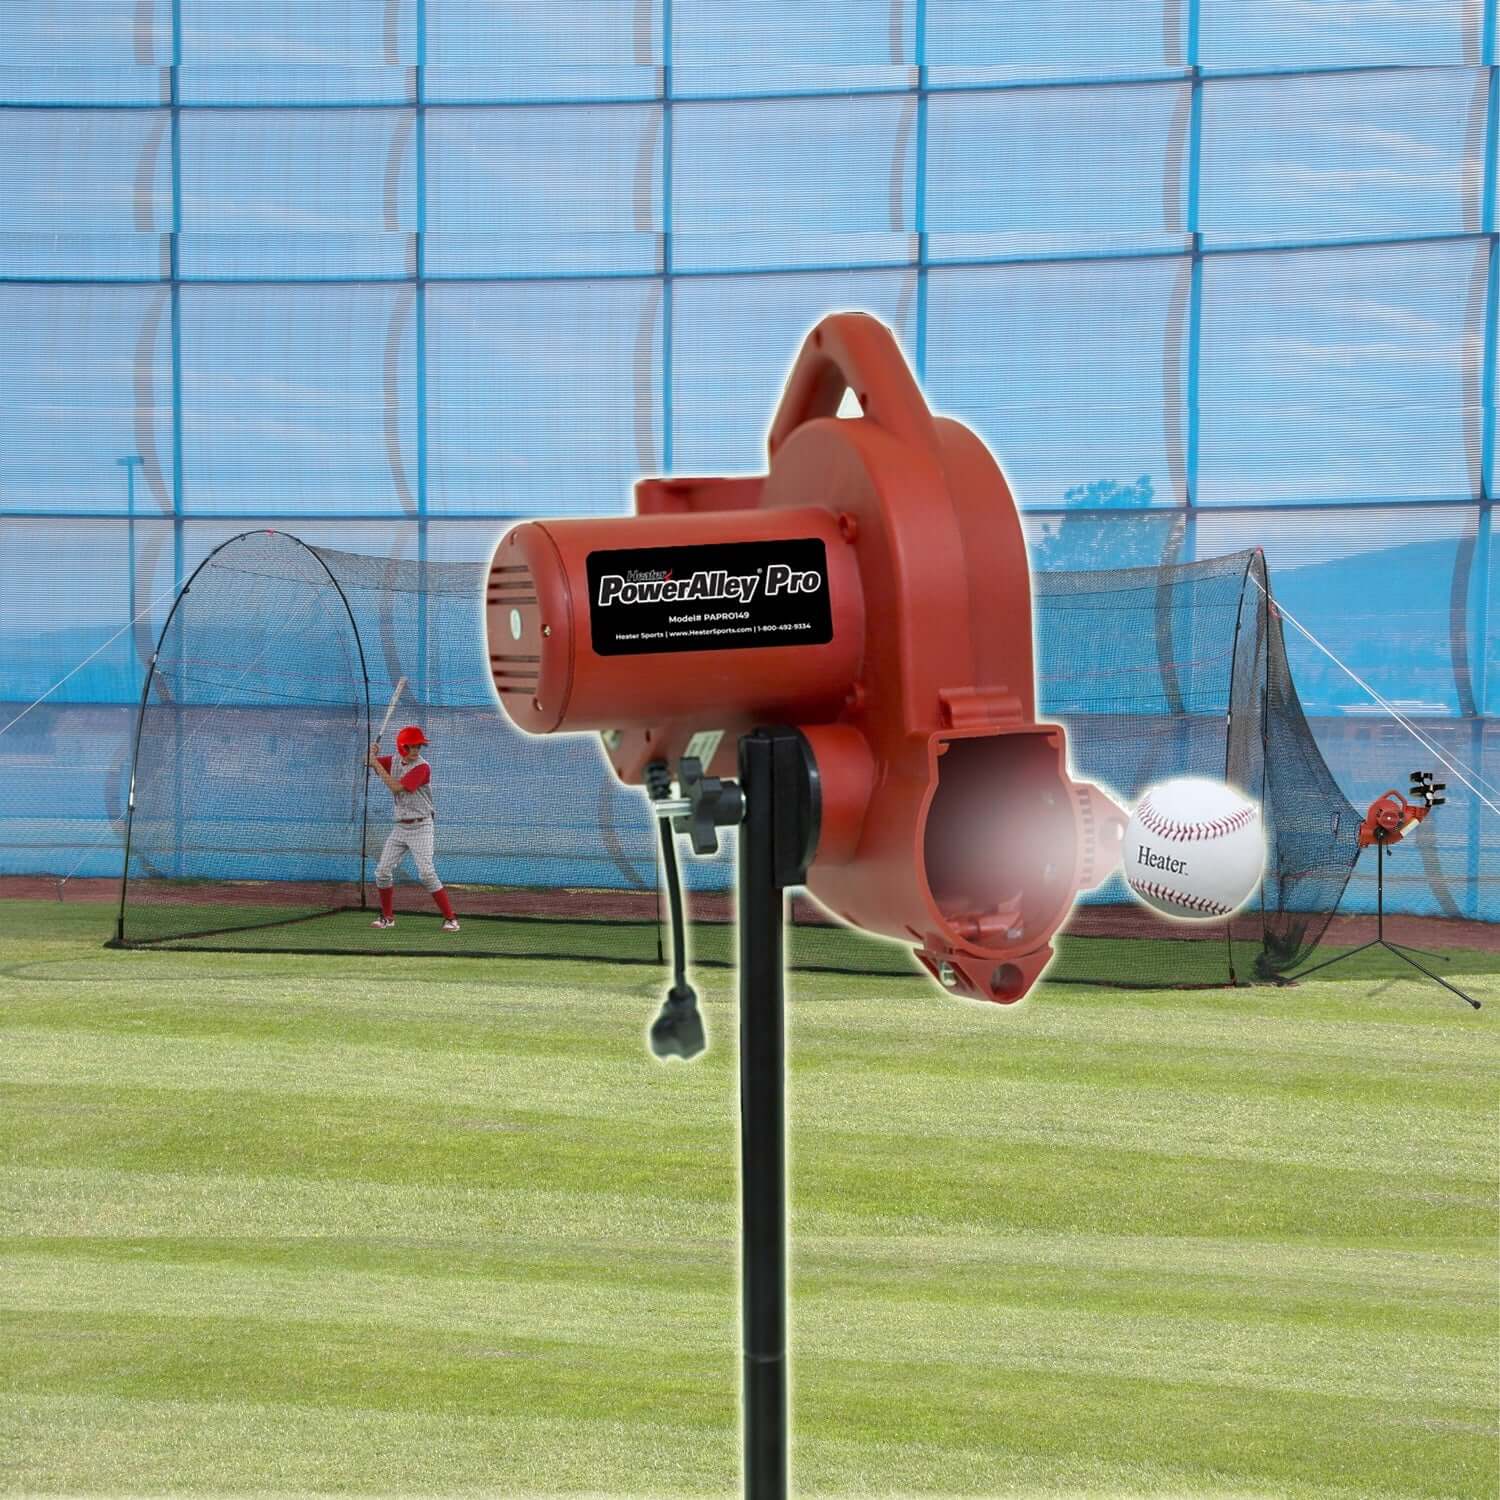 Real Ball 80 MPH Pitching Machine &amp; 22&#39;x 12&#39;x8&#39; Home Batting Cage Combo - Pitch Machine Pros